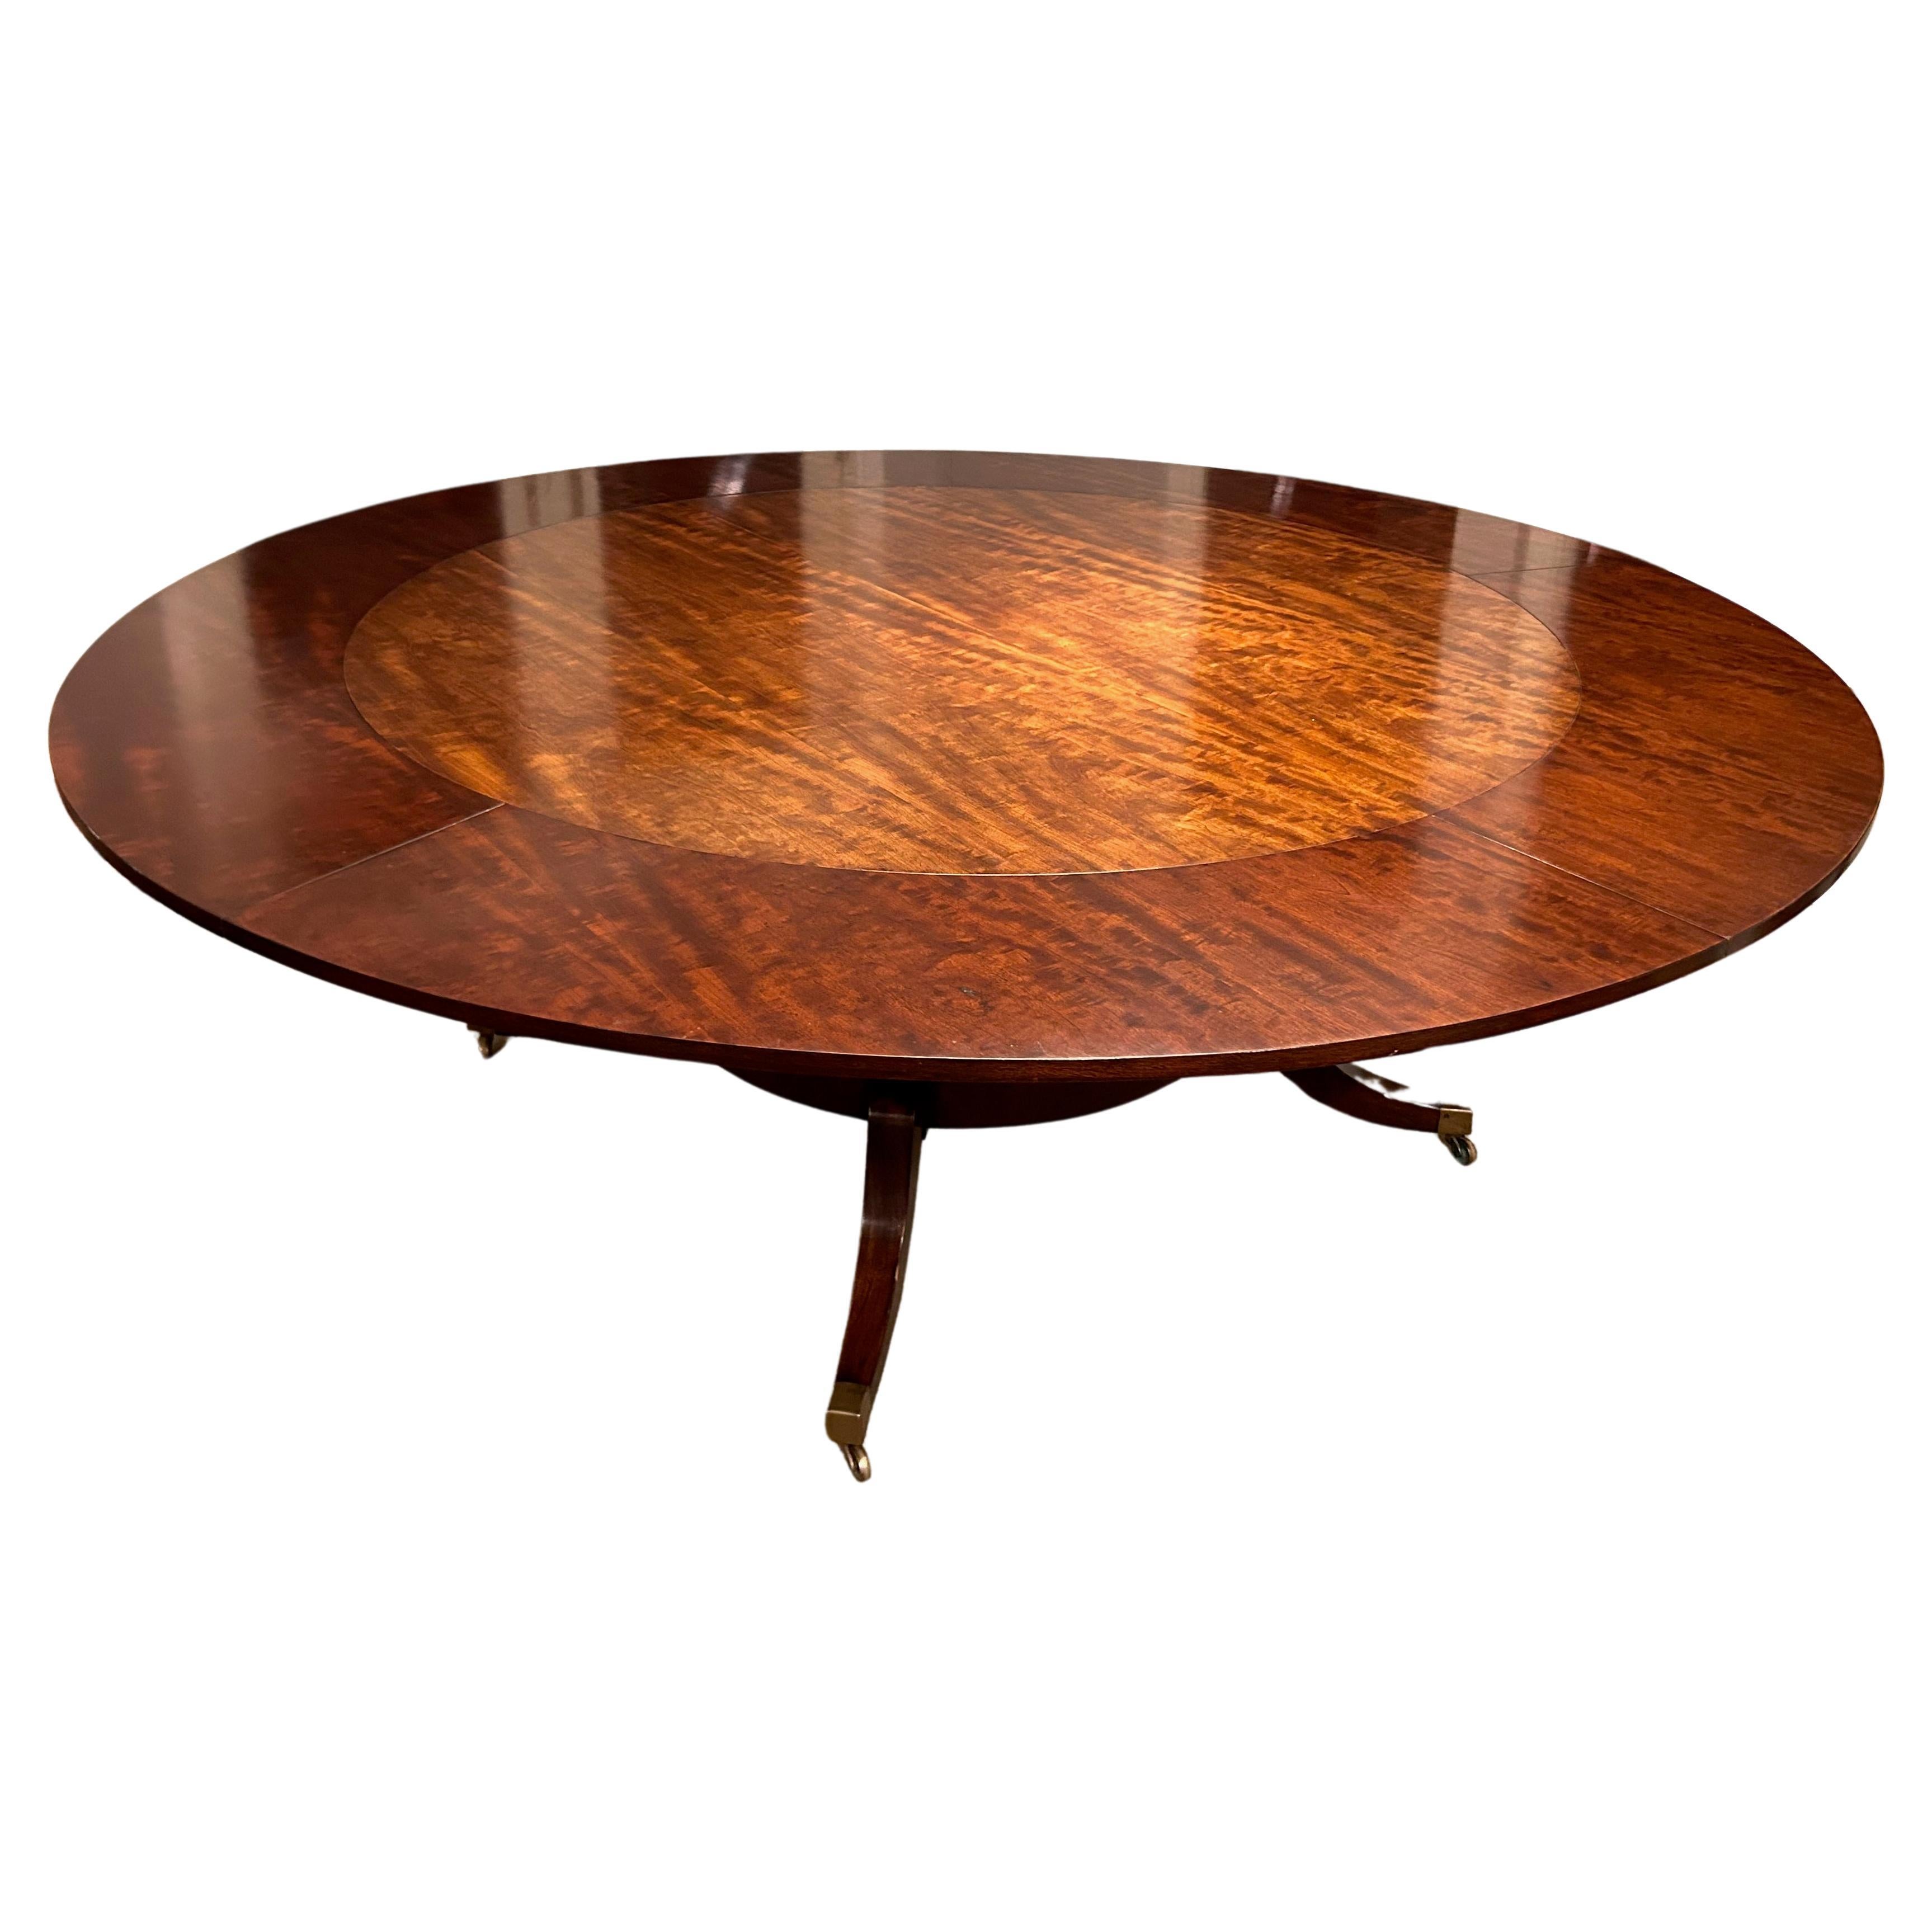 1940's Round Mahogany Veneer Dining Table with Crescent Leaves and Leaf Cabinet For Sale